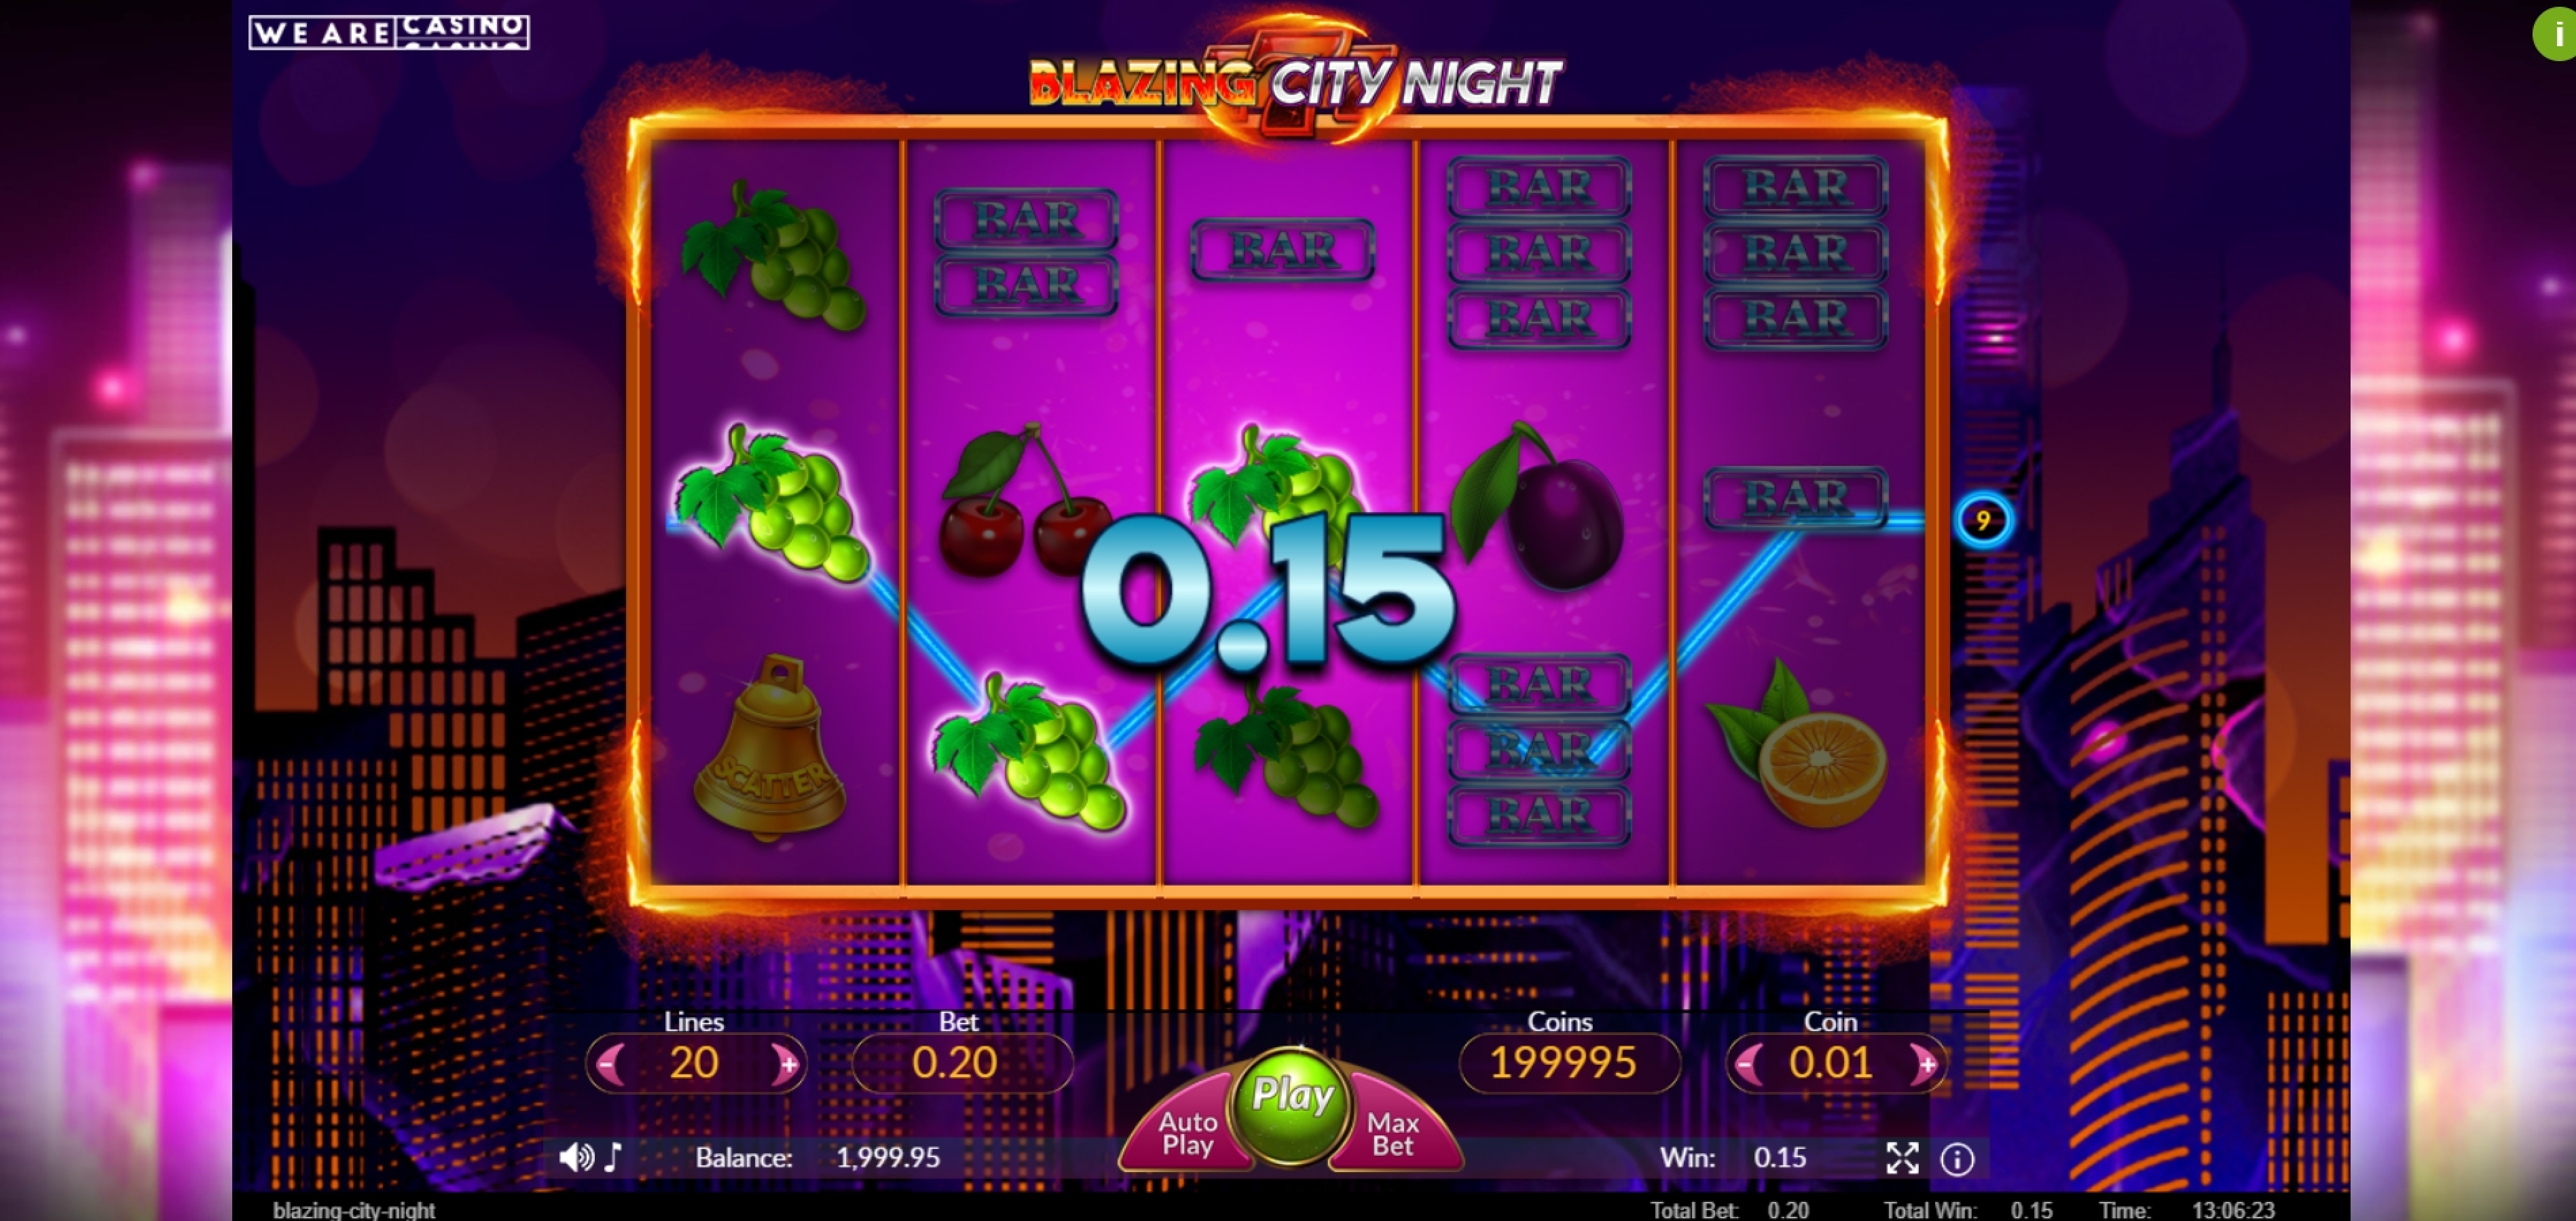 Win Money in Blazing City Night Free Slot Game by We Are Casino